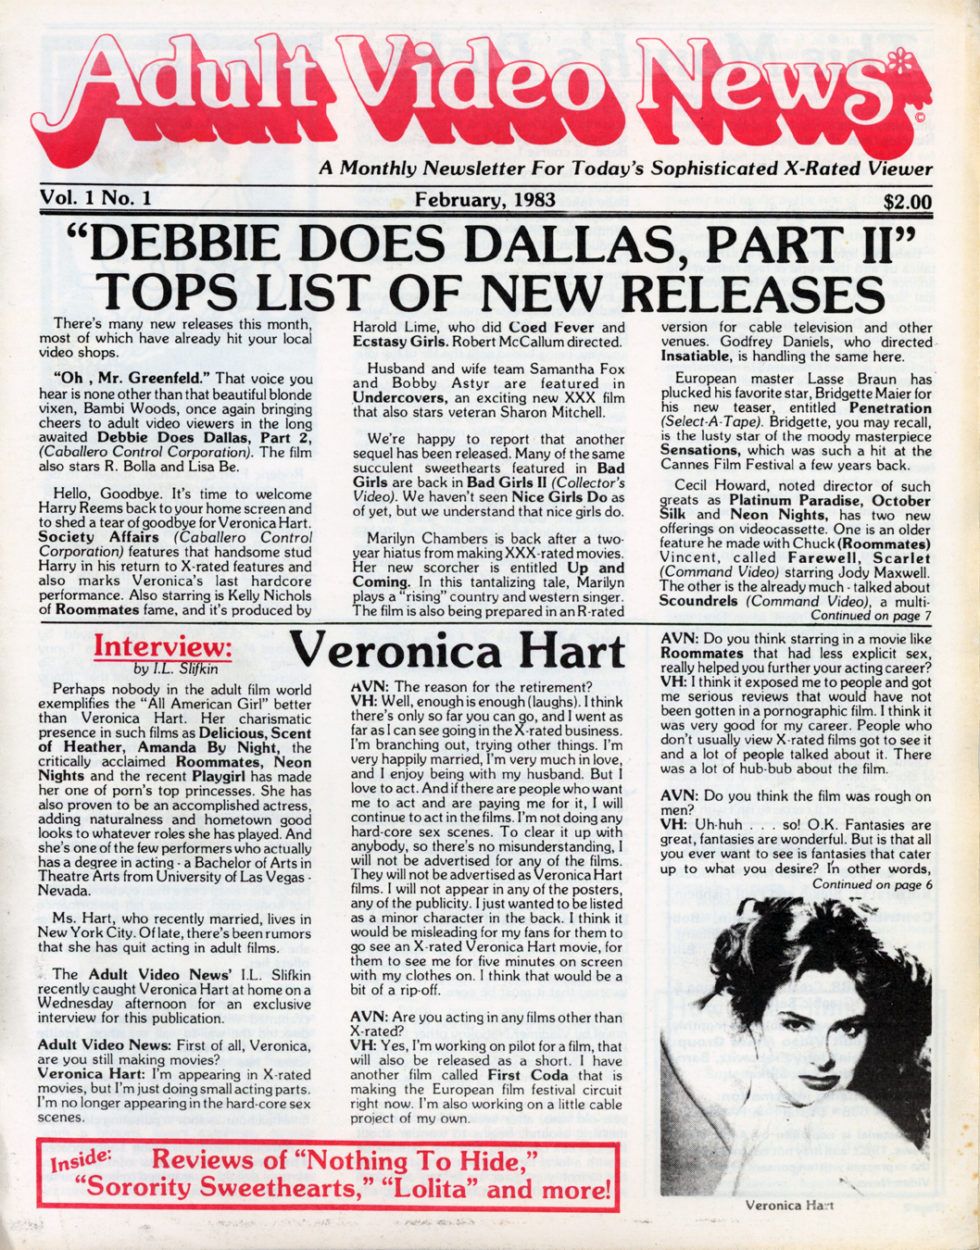 Adult Video News - The Industry Bible, The First Year (1983-84) photo picture